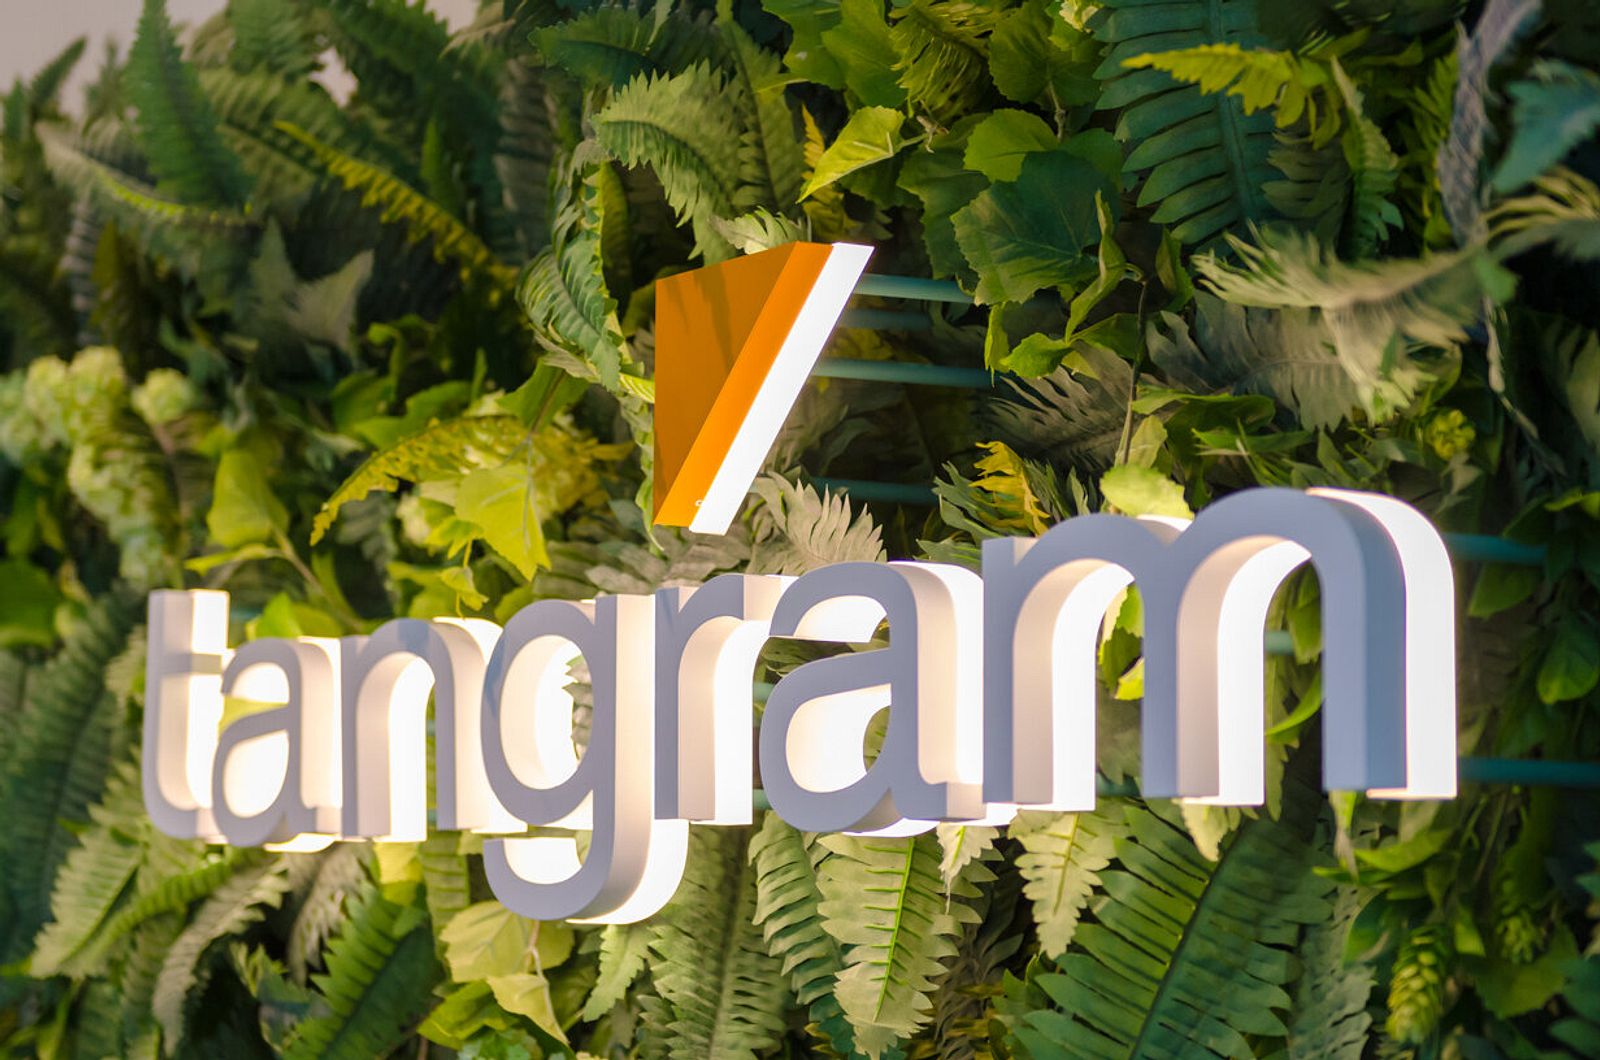 The Tangram logo mounted on a greenery wall is lighted by it's backlight leds.